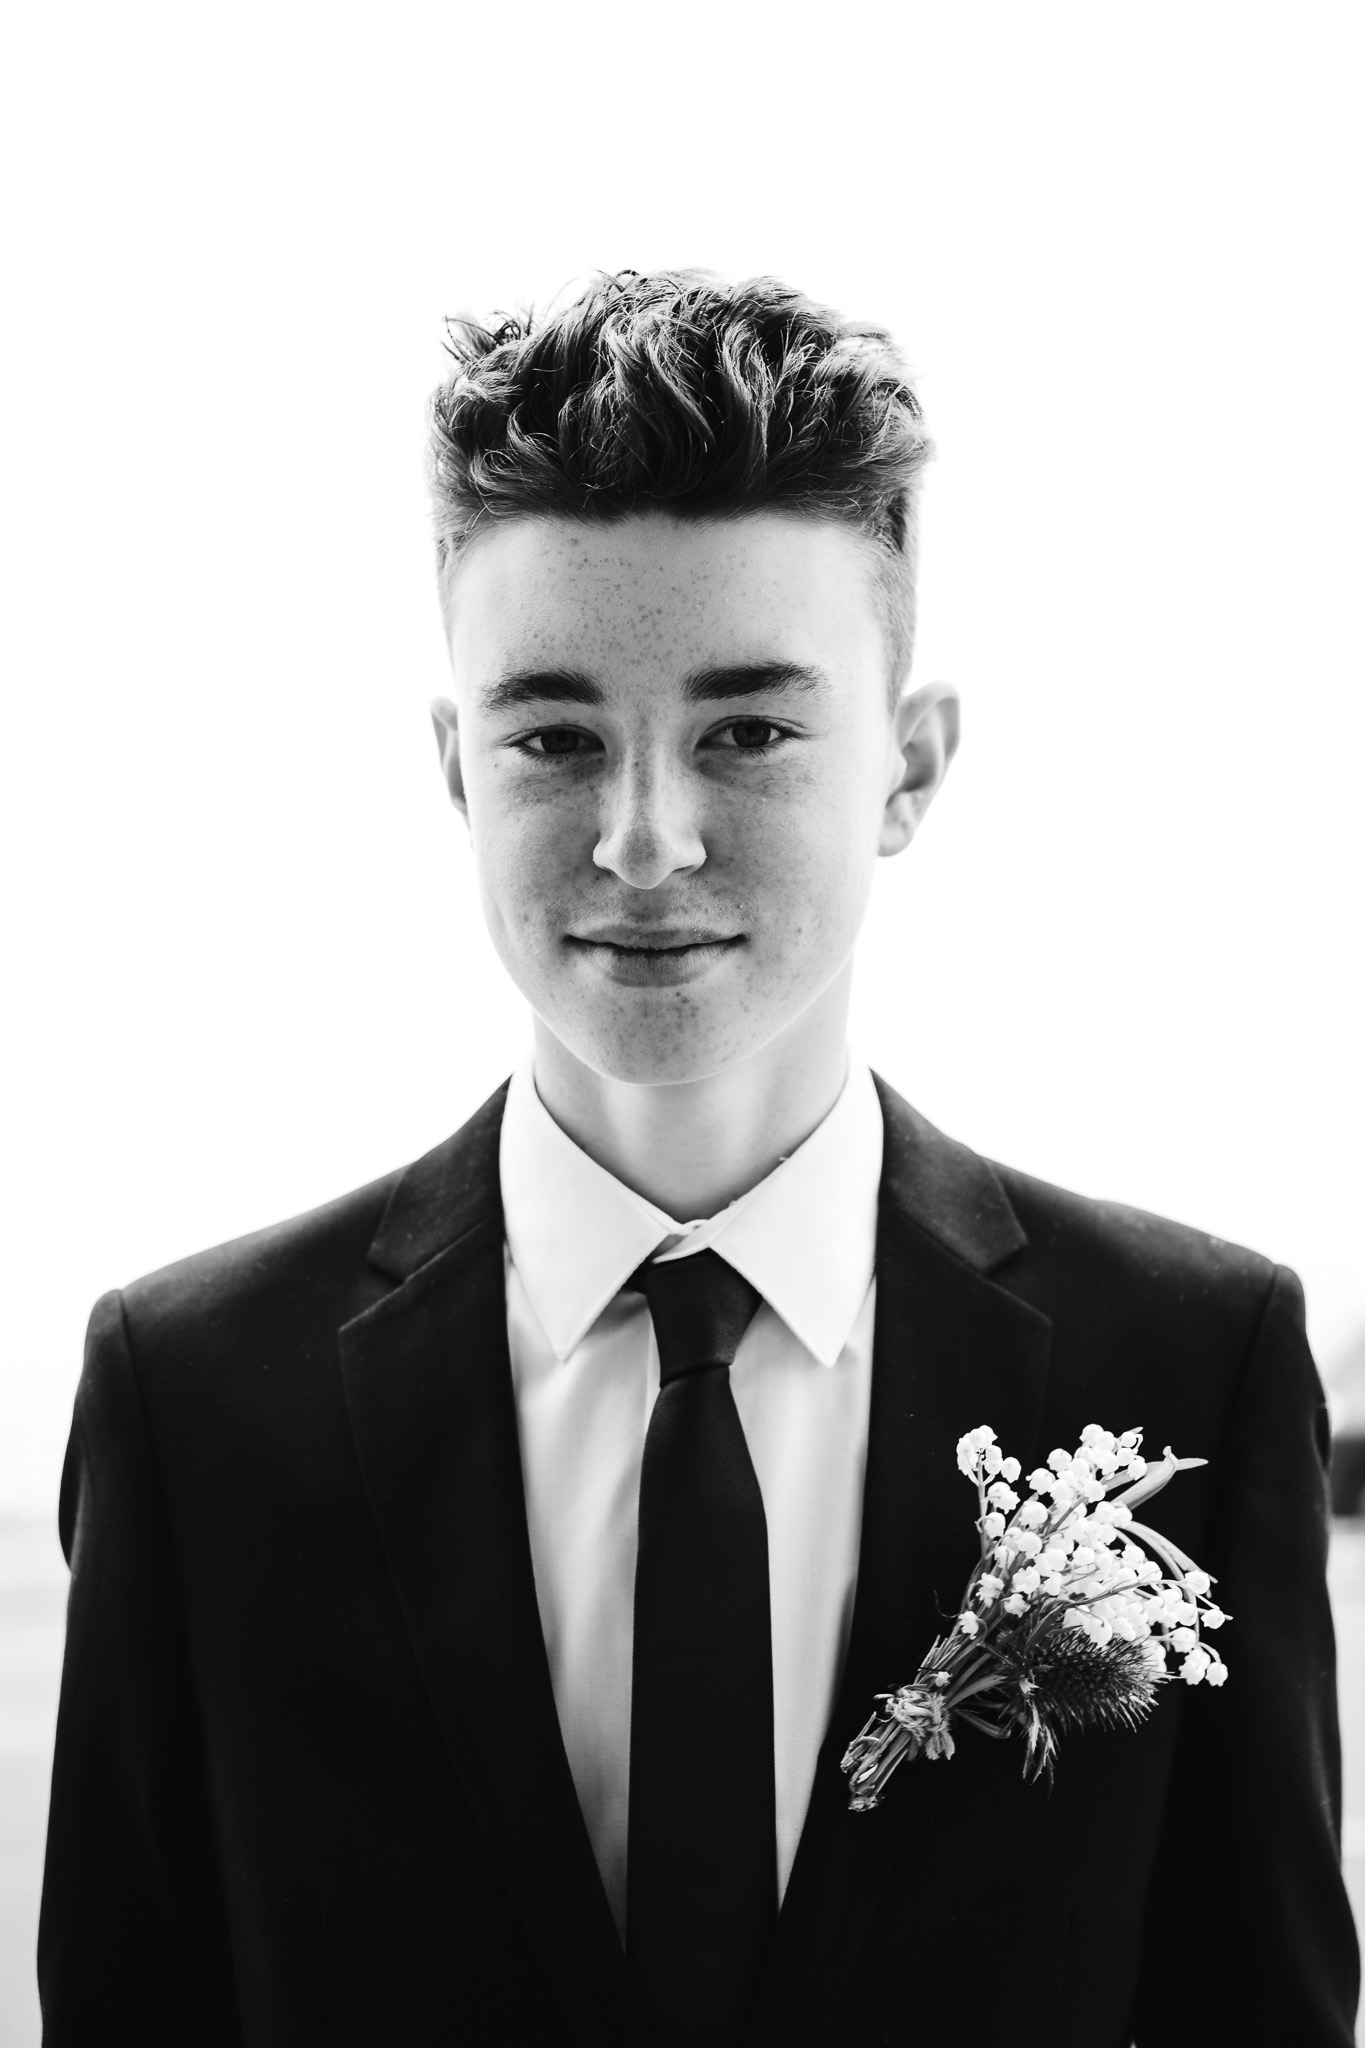 Fin looking directly ahead wearing a black suit and lapel during his parents wedding.